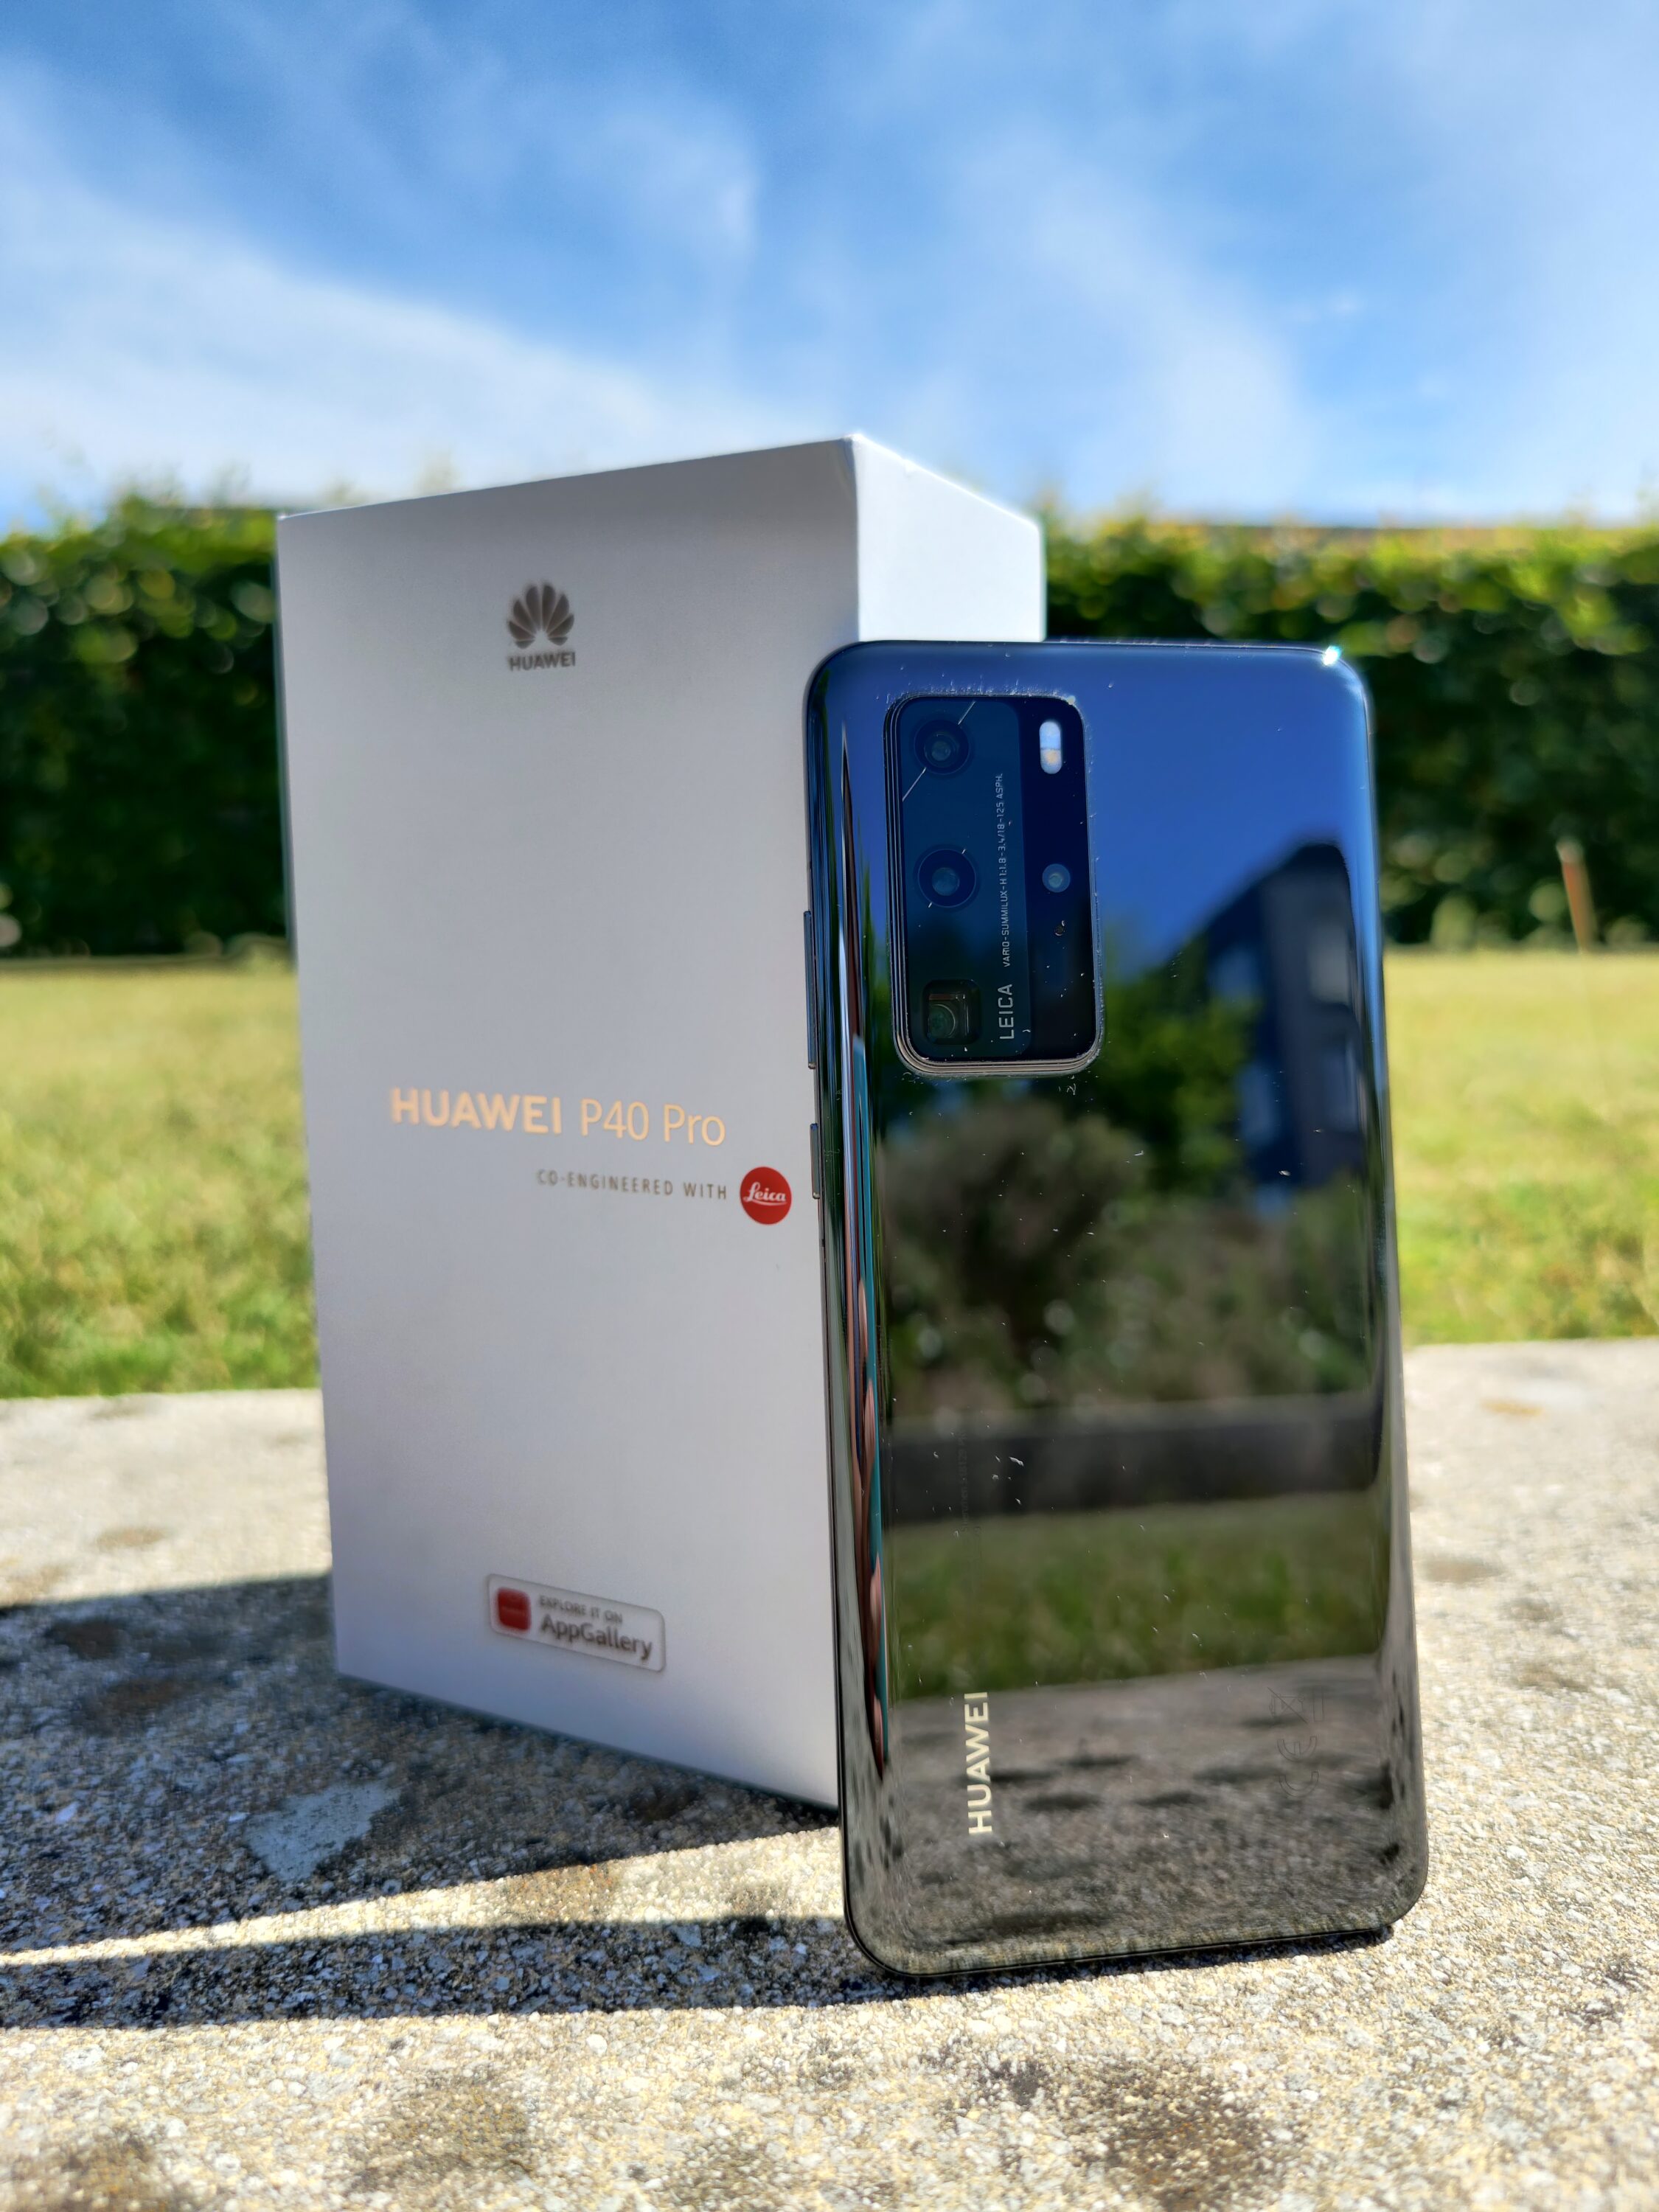 Huawei P40 Pro - Does Android work without Google?